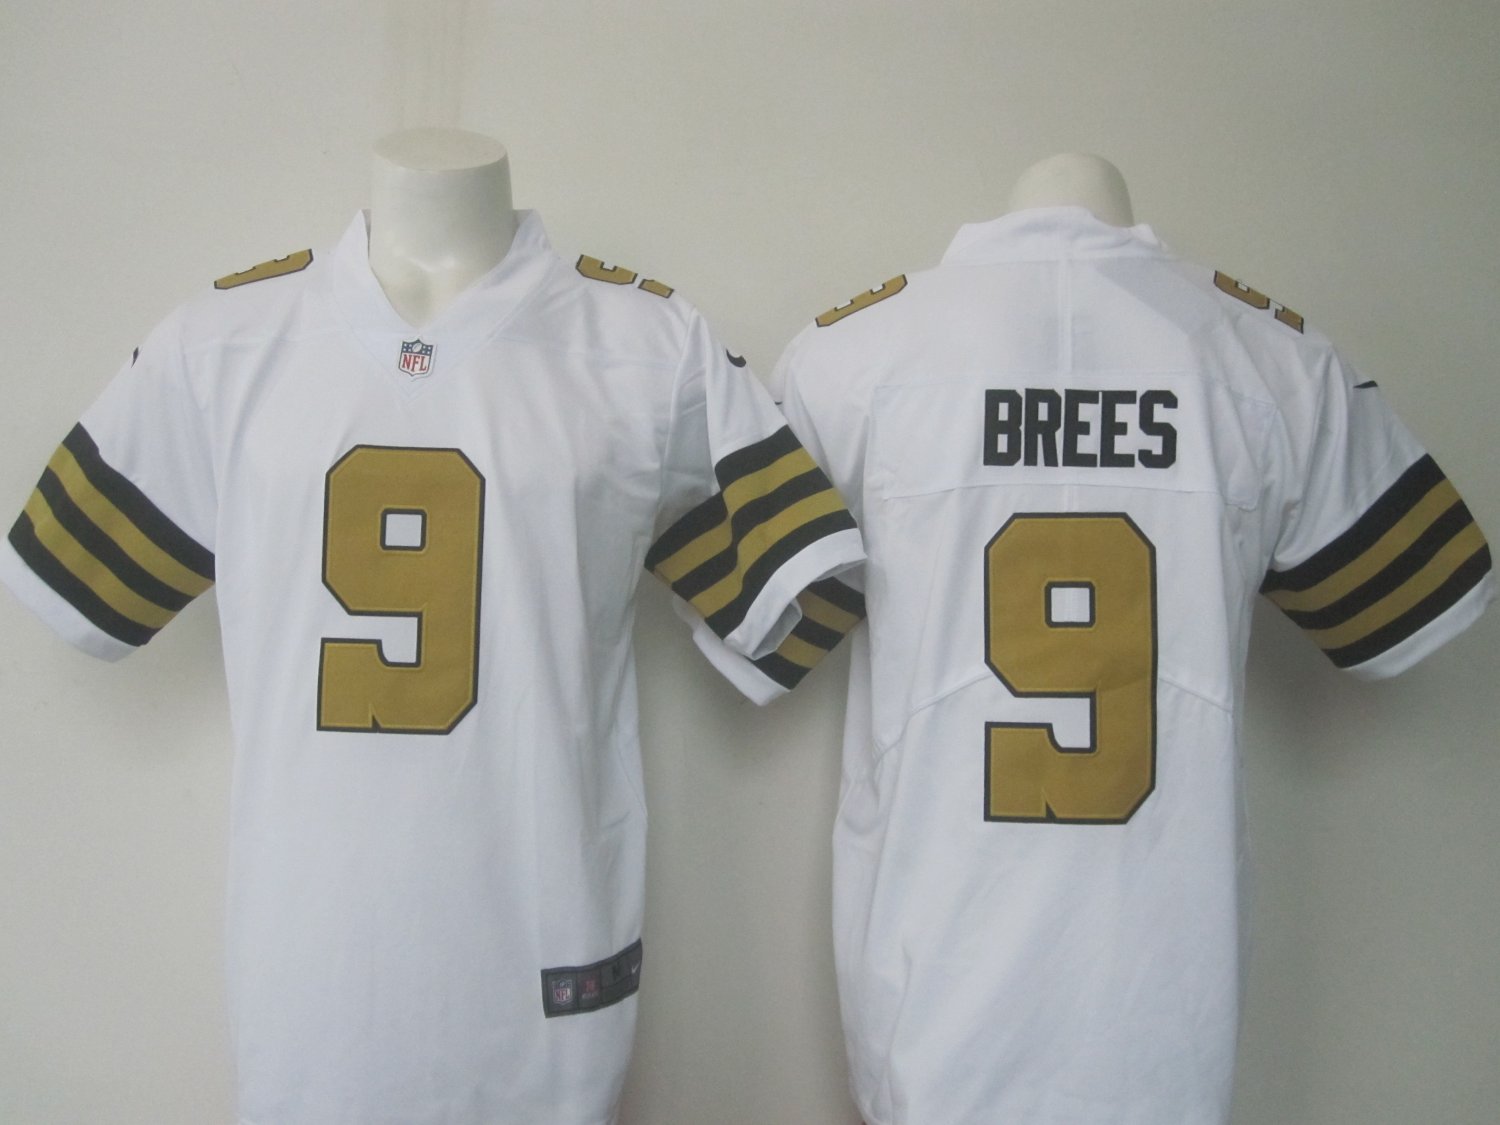 drew brees color rush jersey